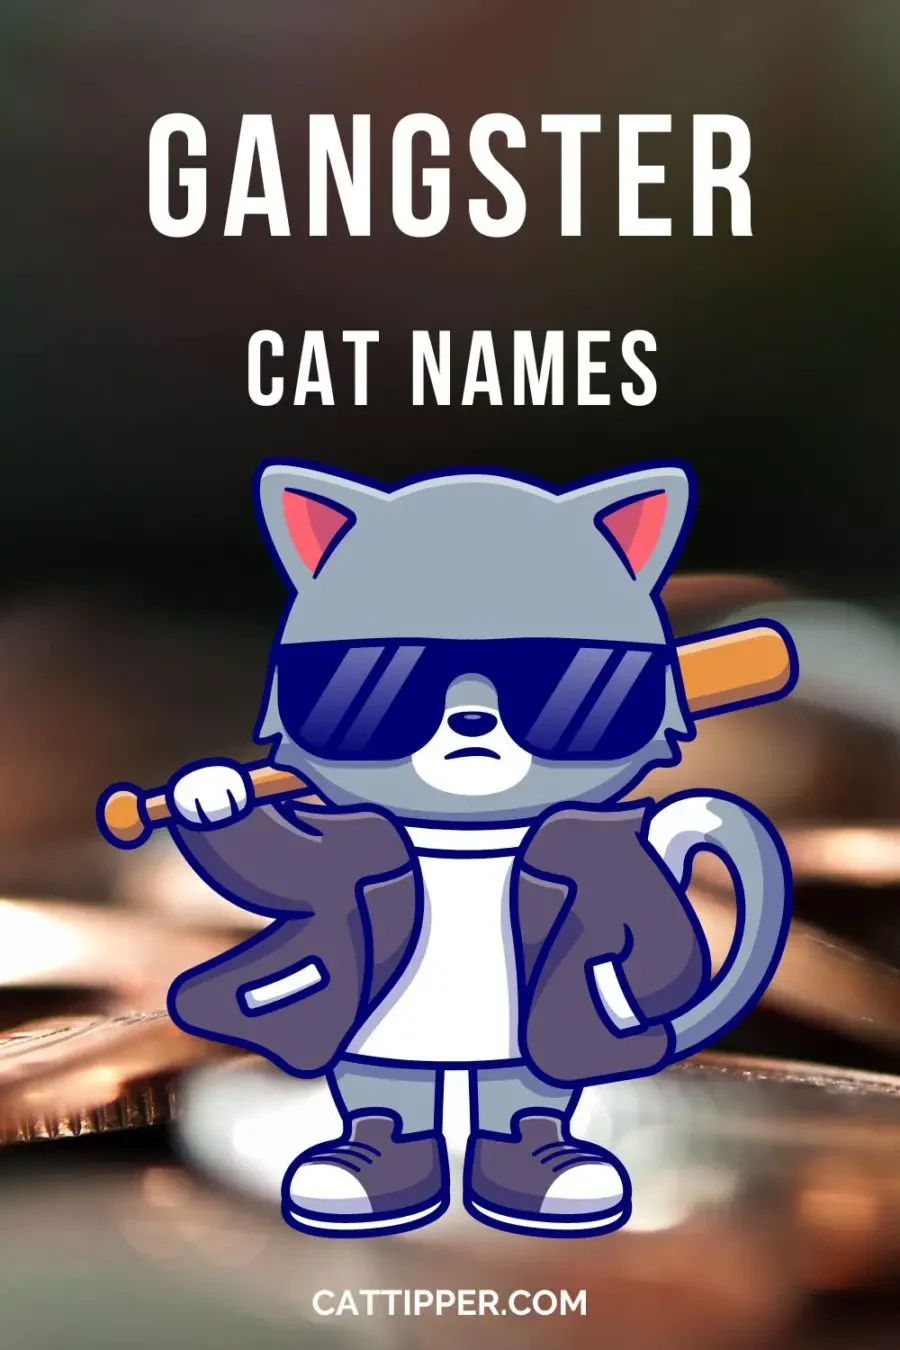 Gangster Cat Names - Mafia cat names, movie names and more